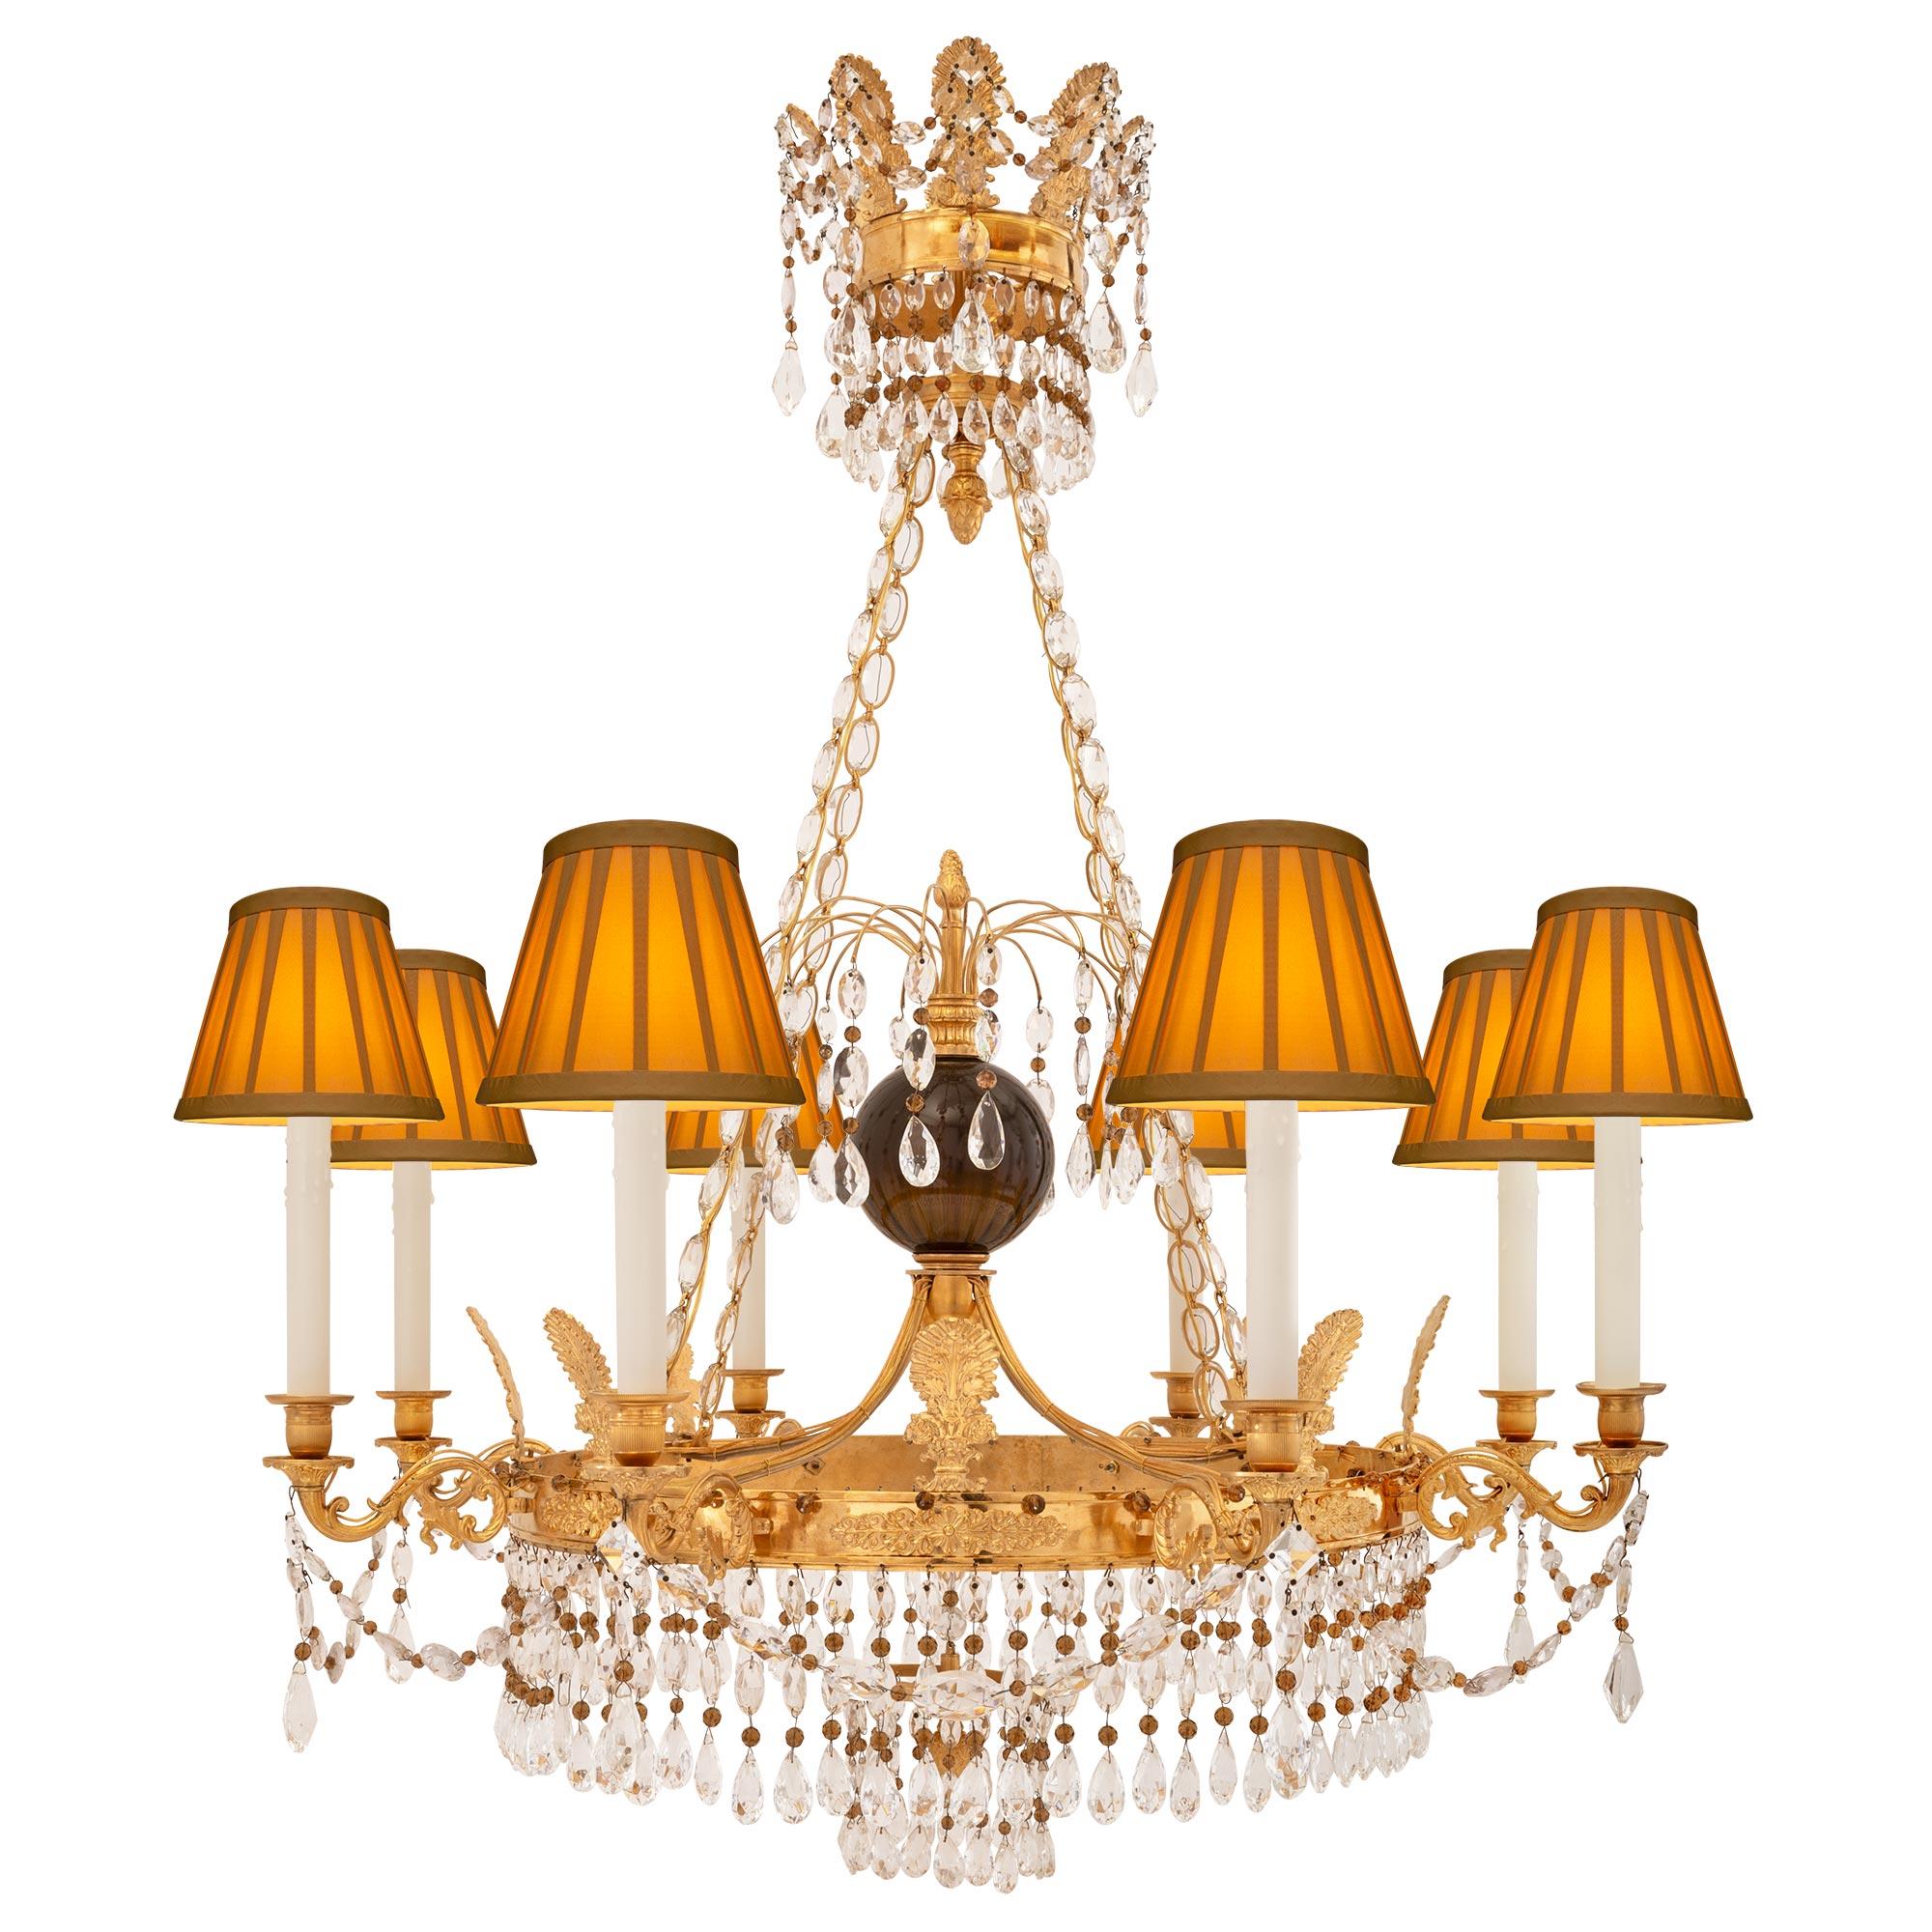 A stunning and extremely high-quality Baltic 19th century neo-classical st. ormolu, crystal, and smoked glass chandelier. The eight-light chandelier is centered by a charming bottom acorn finial surrounded by lovely beaded crystal garlands. The